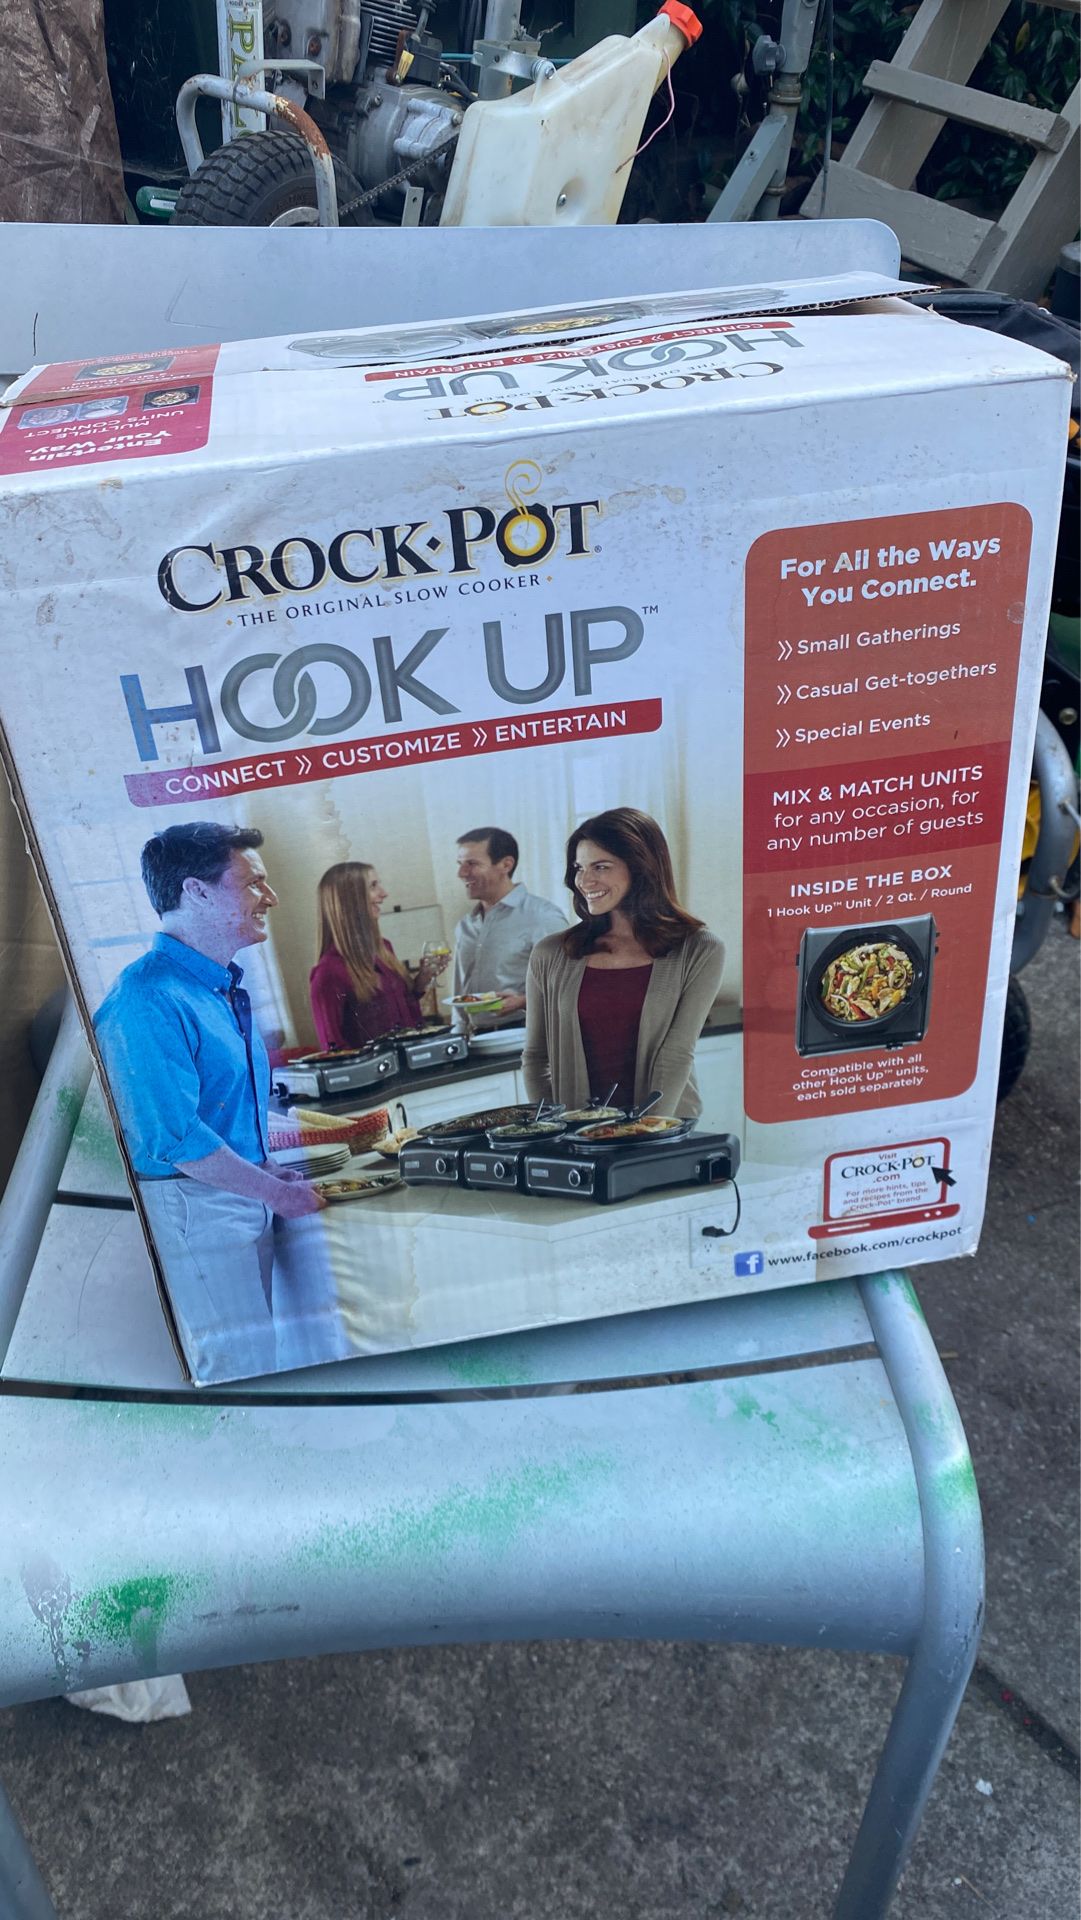 Crockpot hook up unit can connect up to 6 units all together